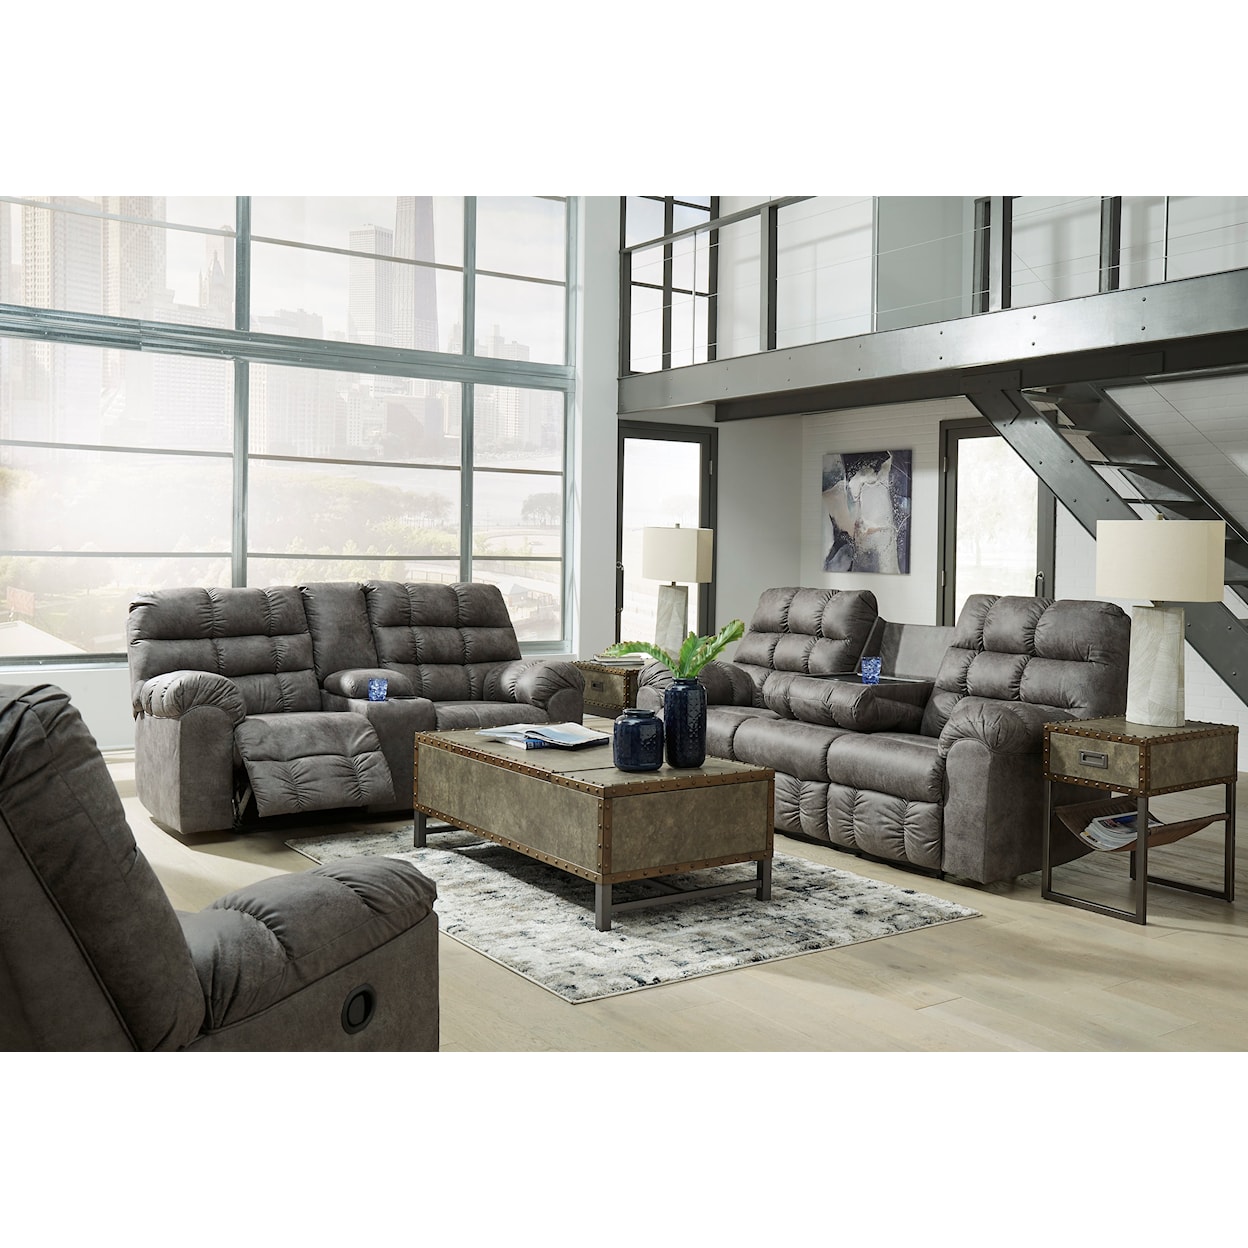 Signature Derwin Reclining Sofa with Drop Down Table